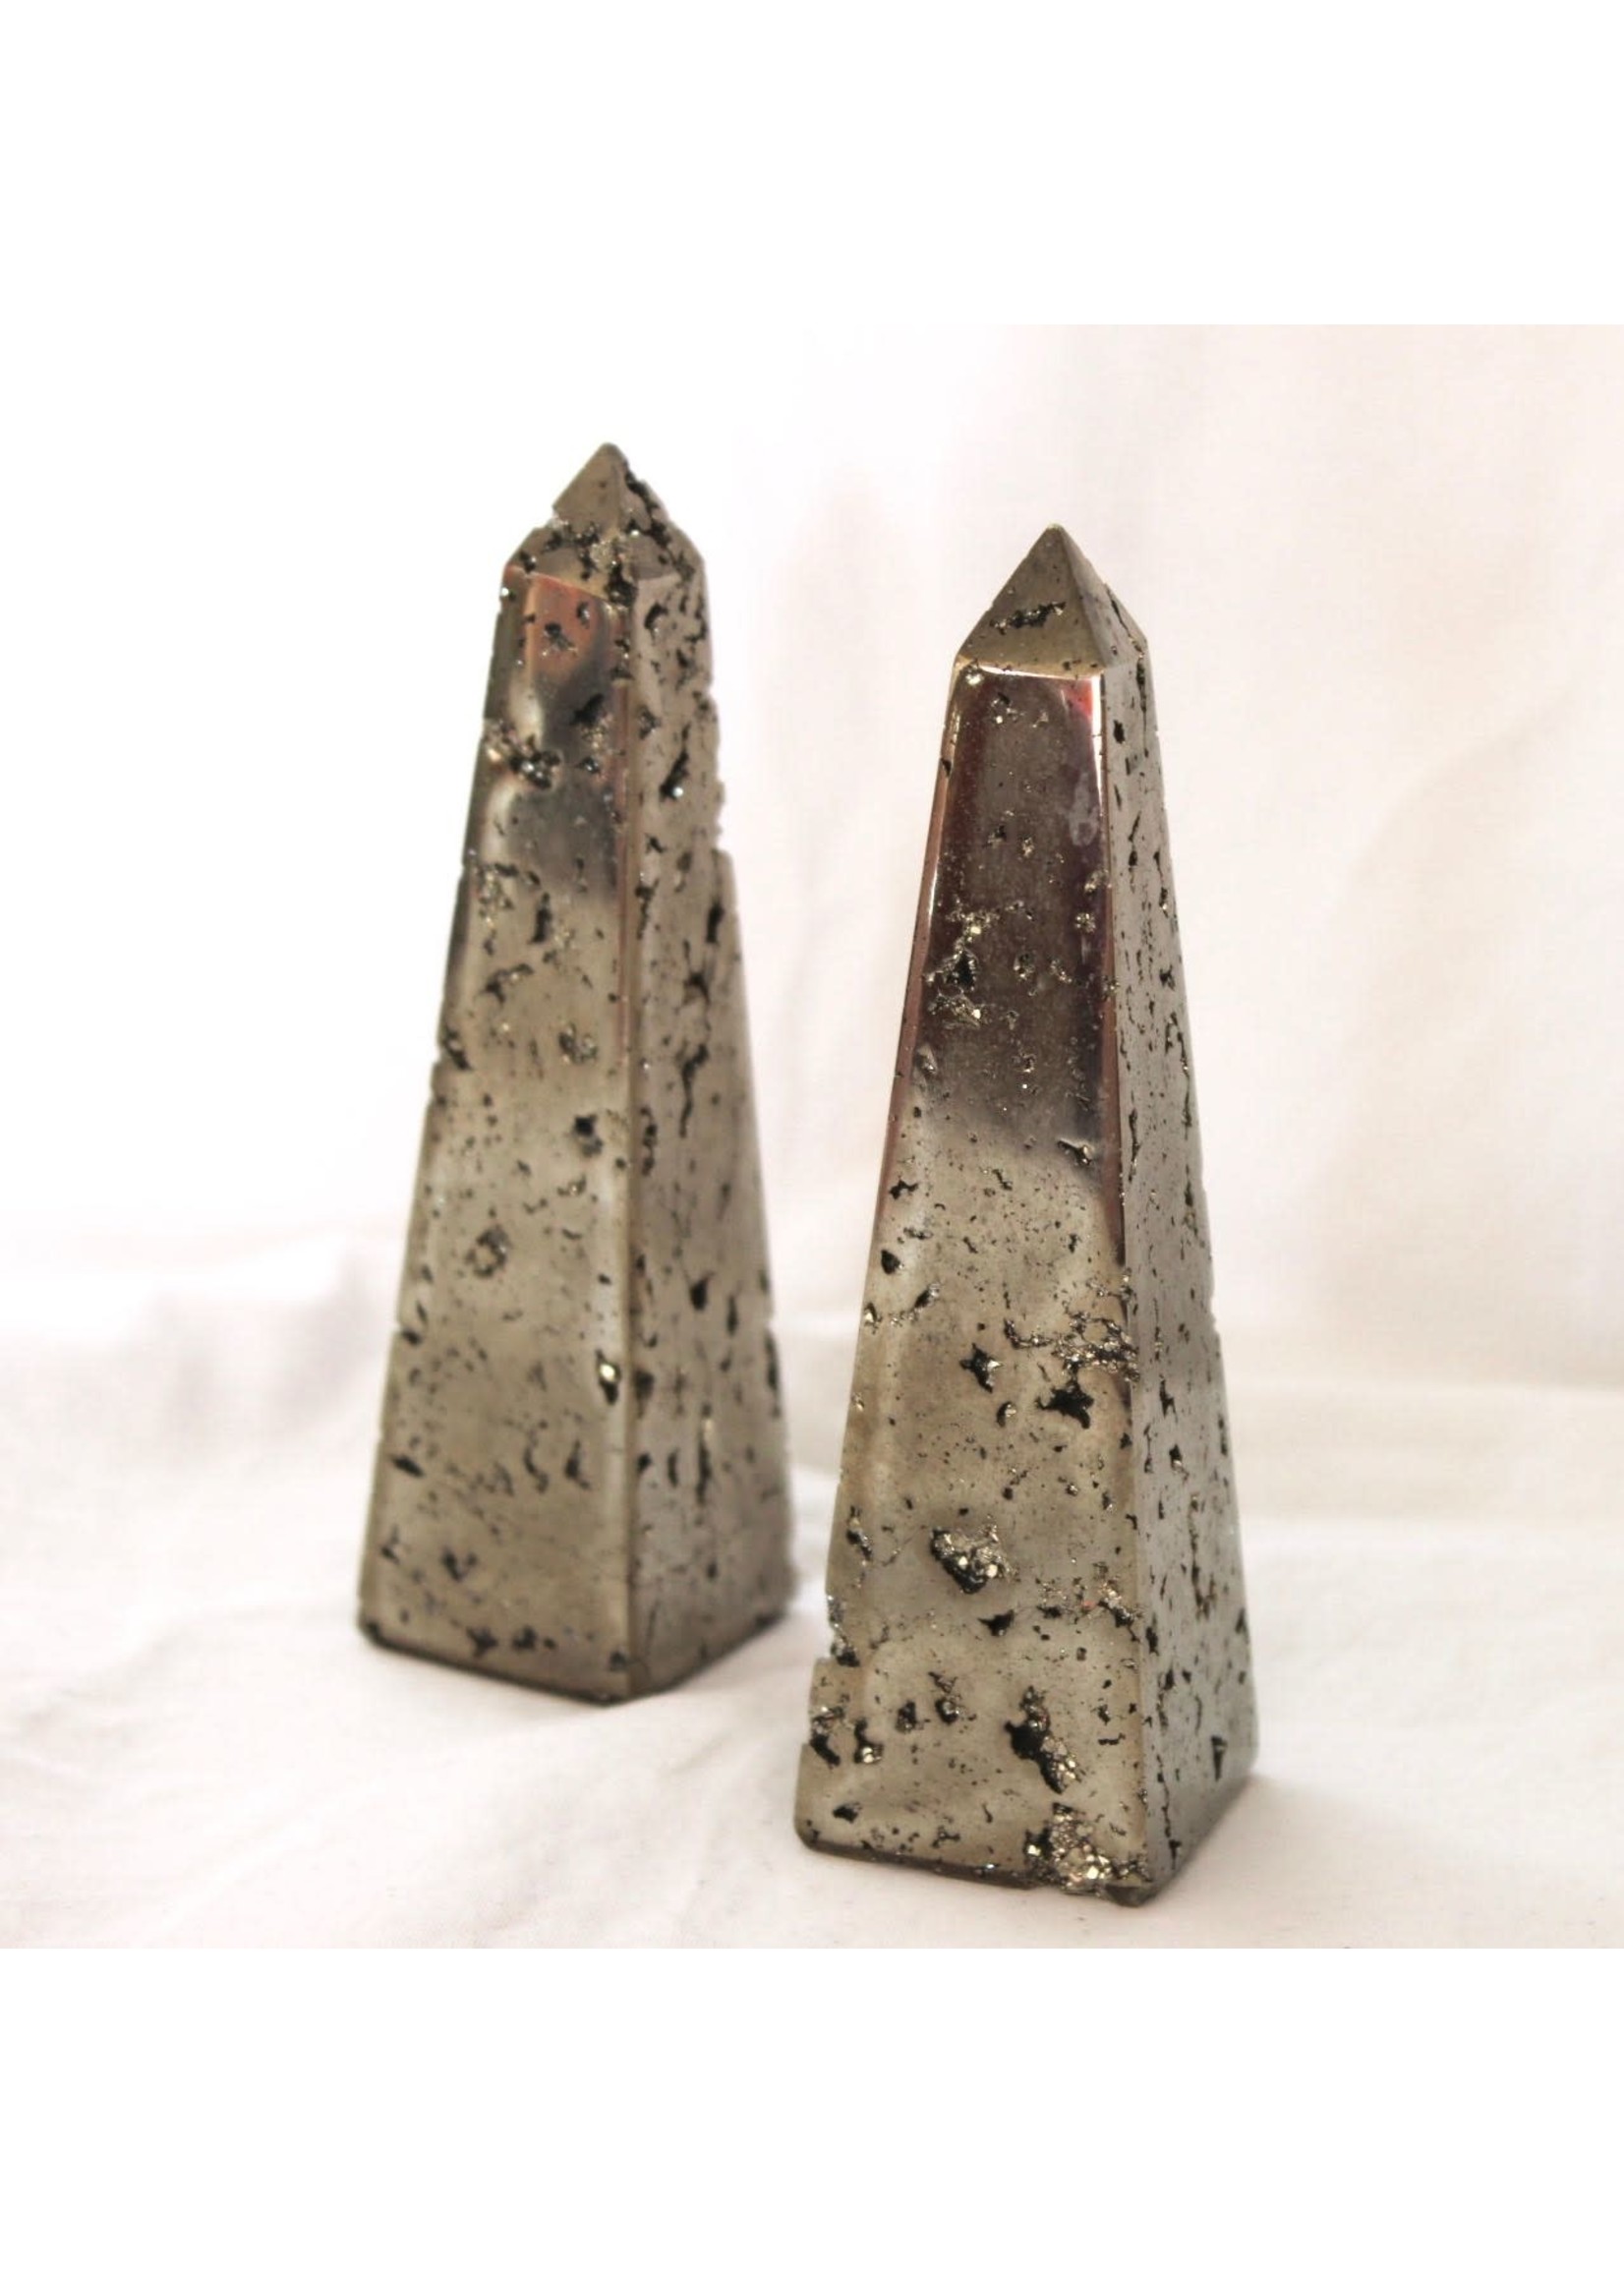 Pyrite Obelisks for touching the sun